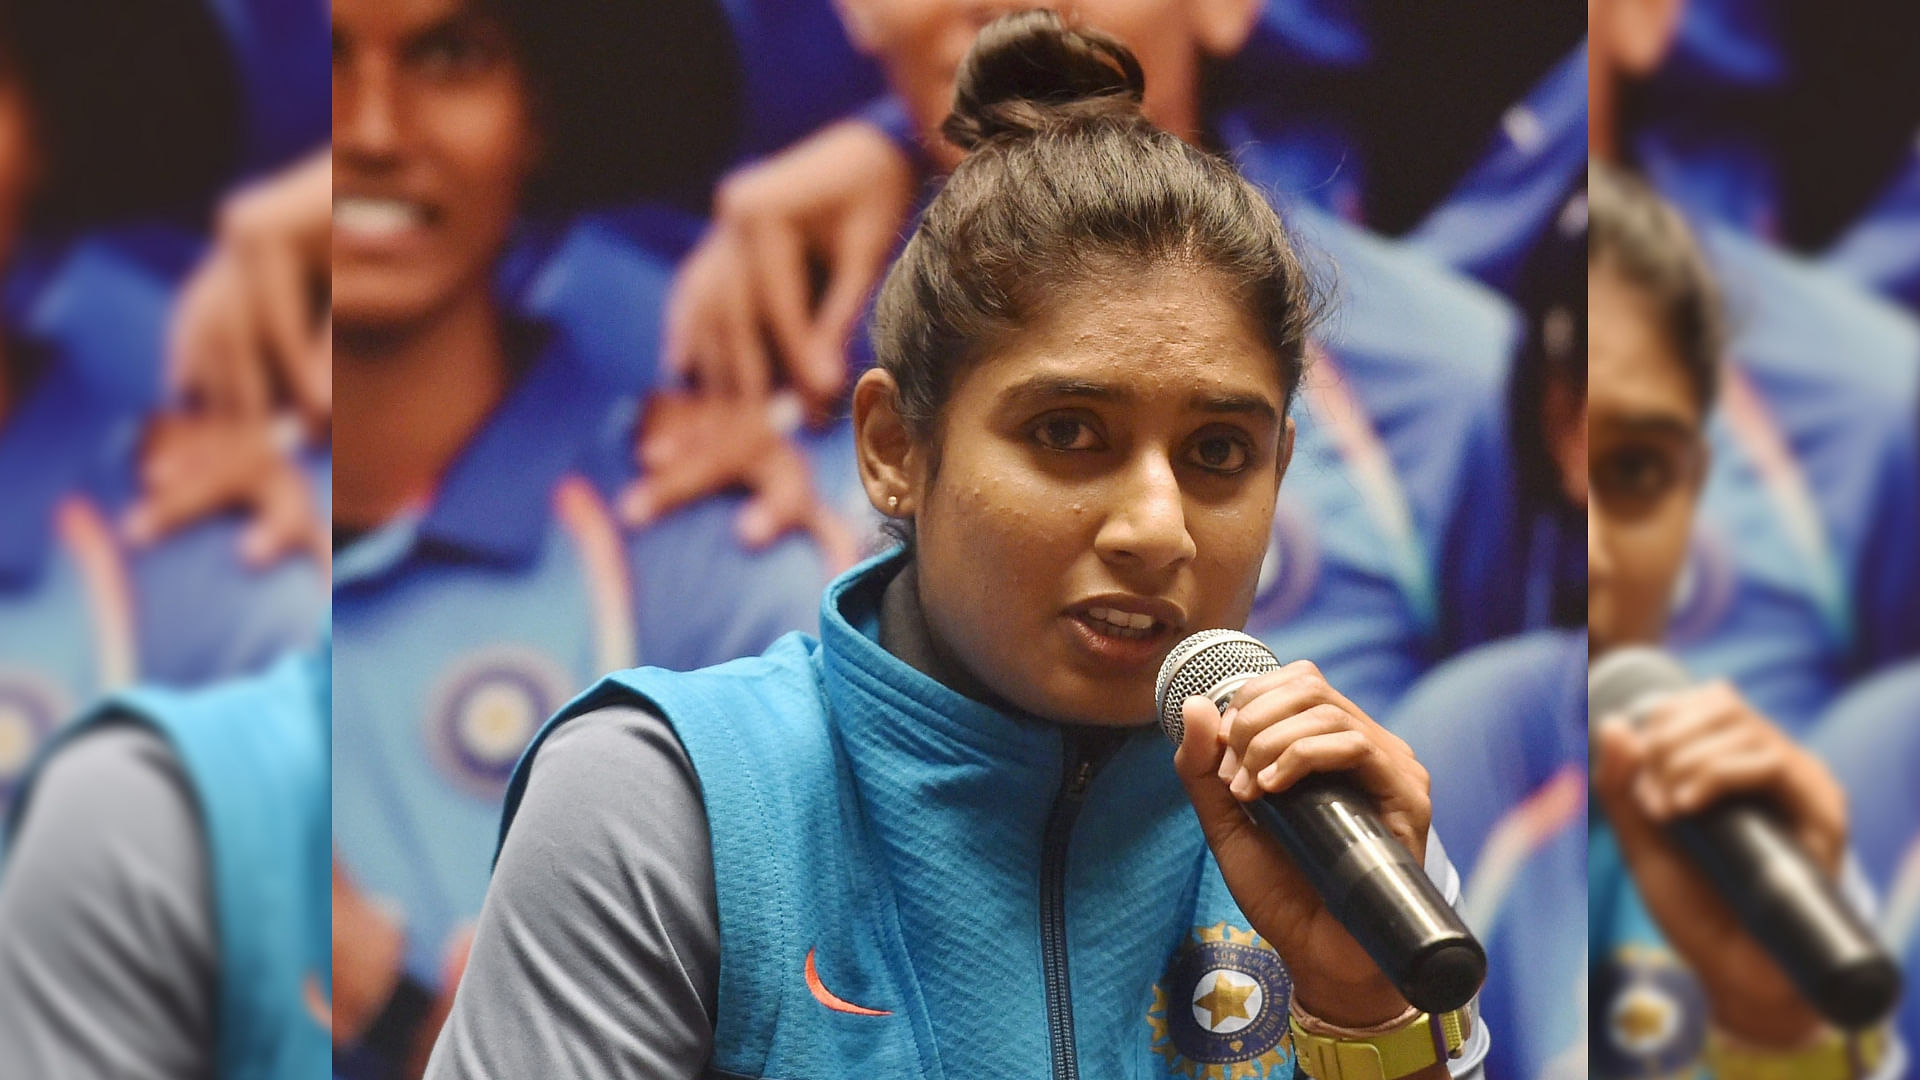 Mithali Raj has become the first female cricketer to play in 200 matches in the 50-over format.